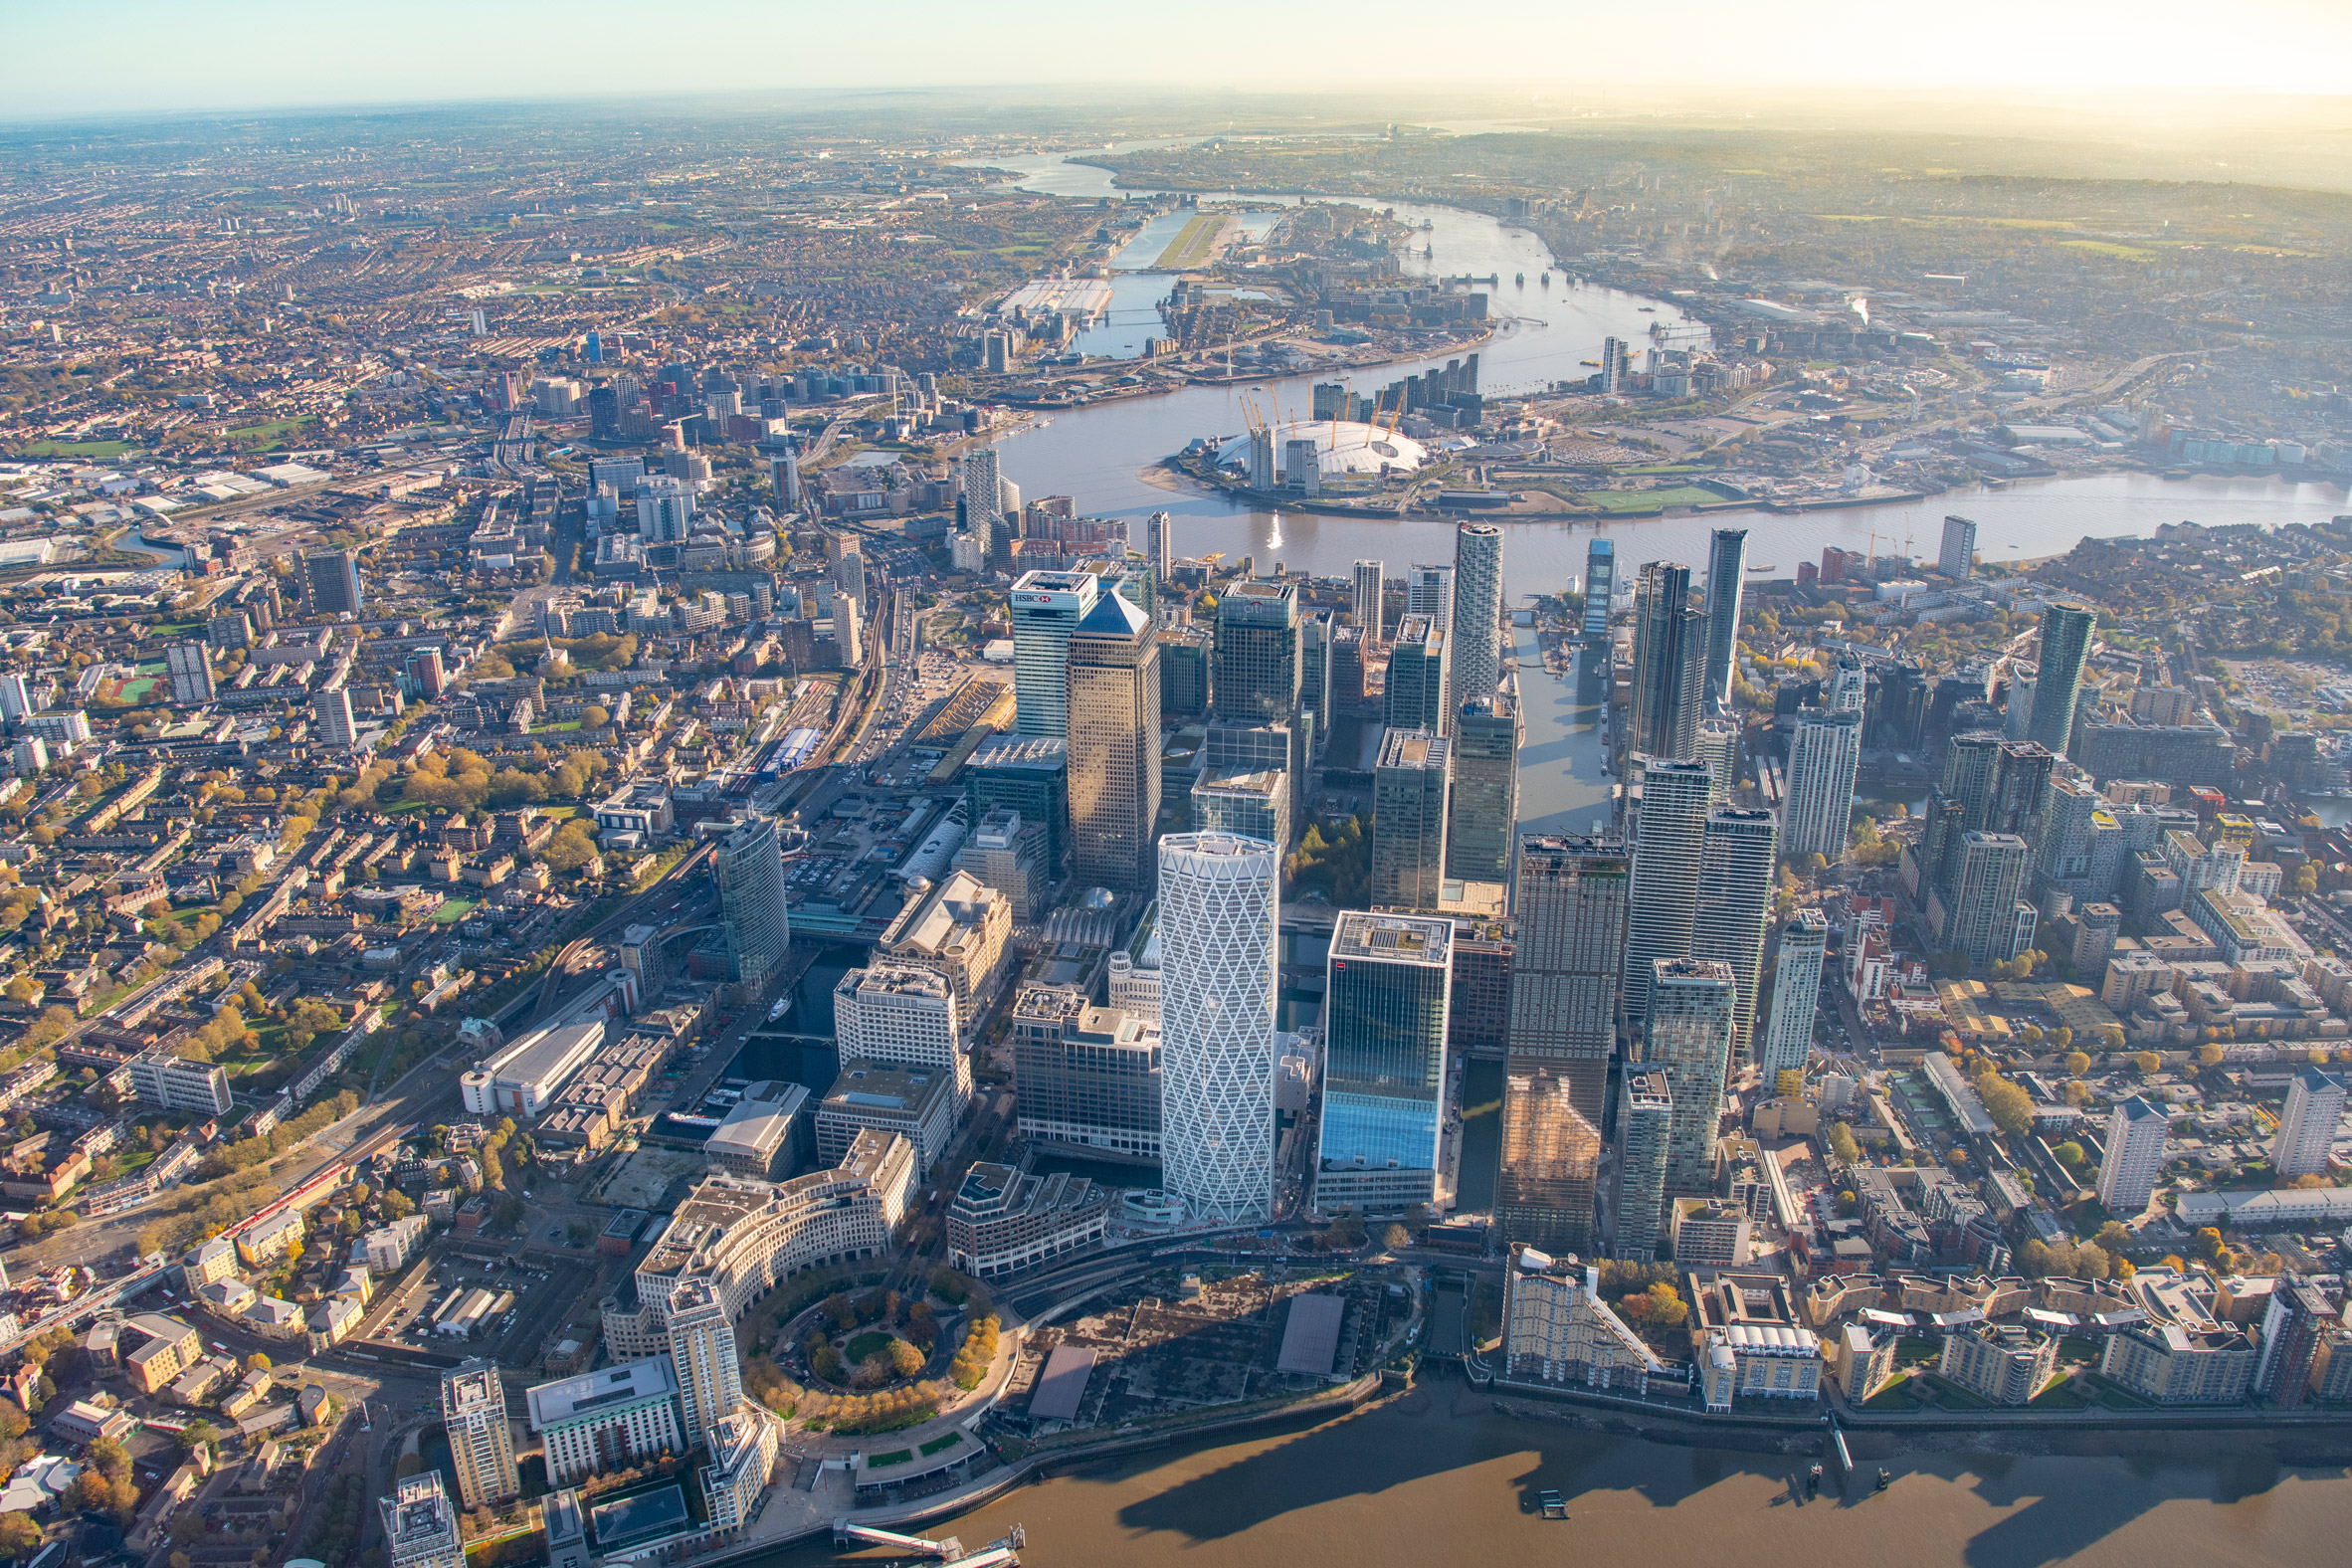 Canary Wharf from the air